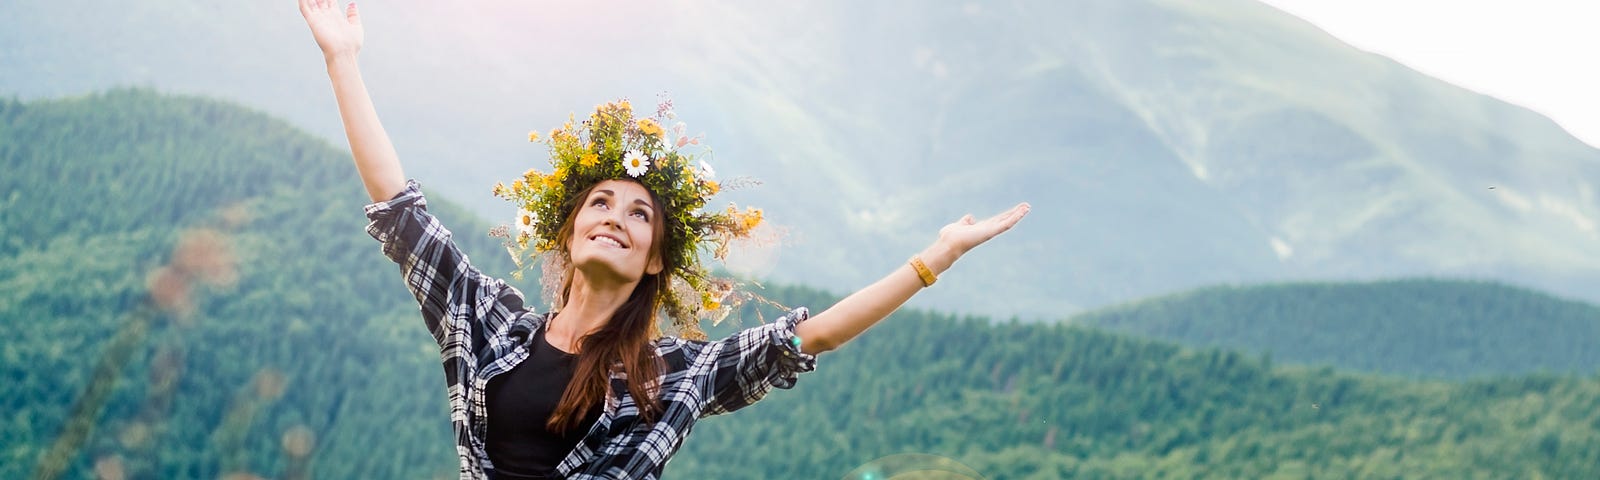 Happy woman in nature